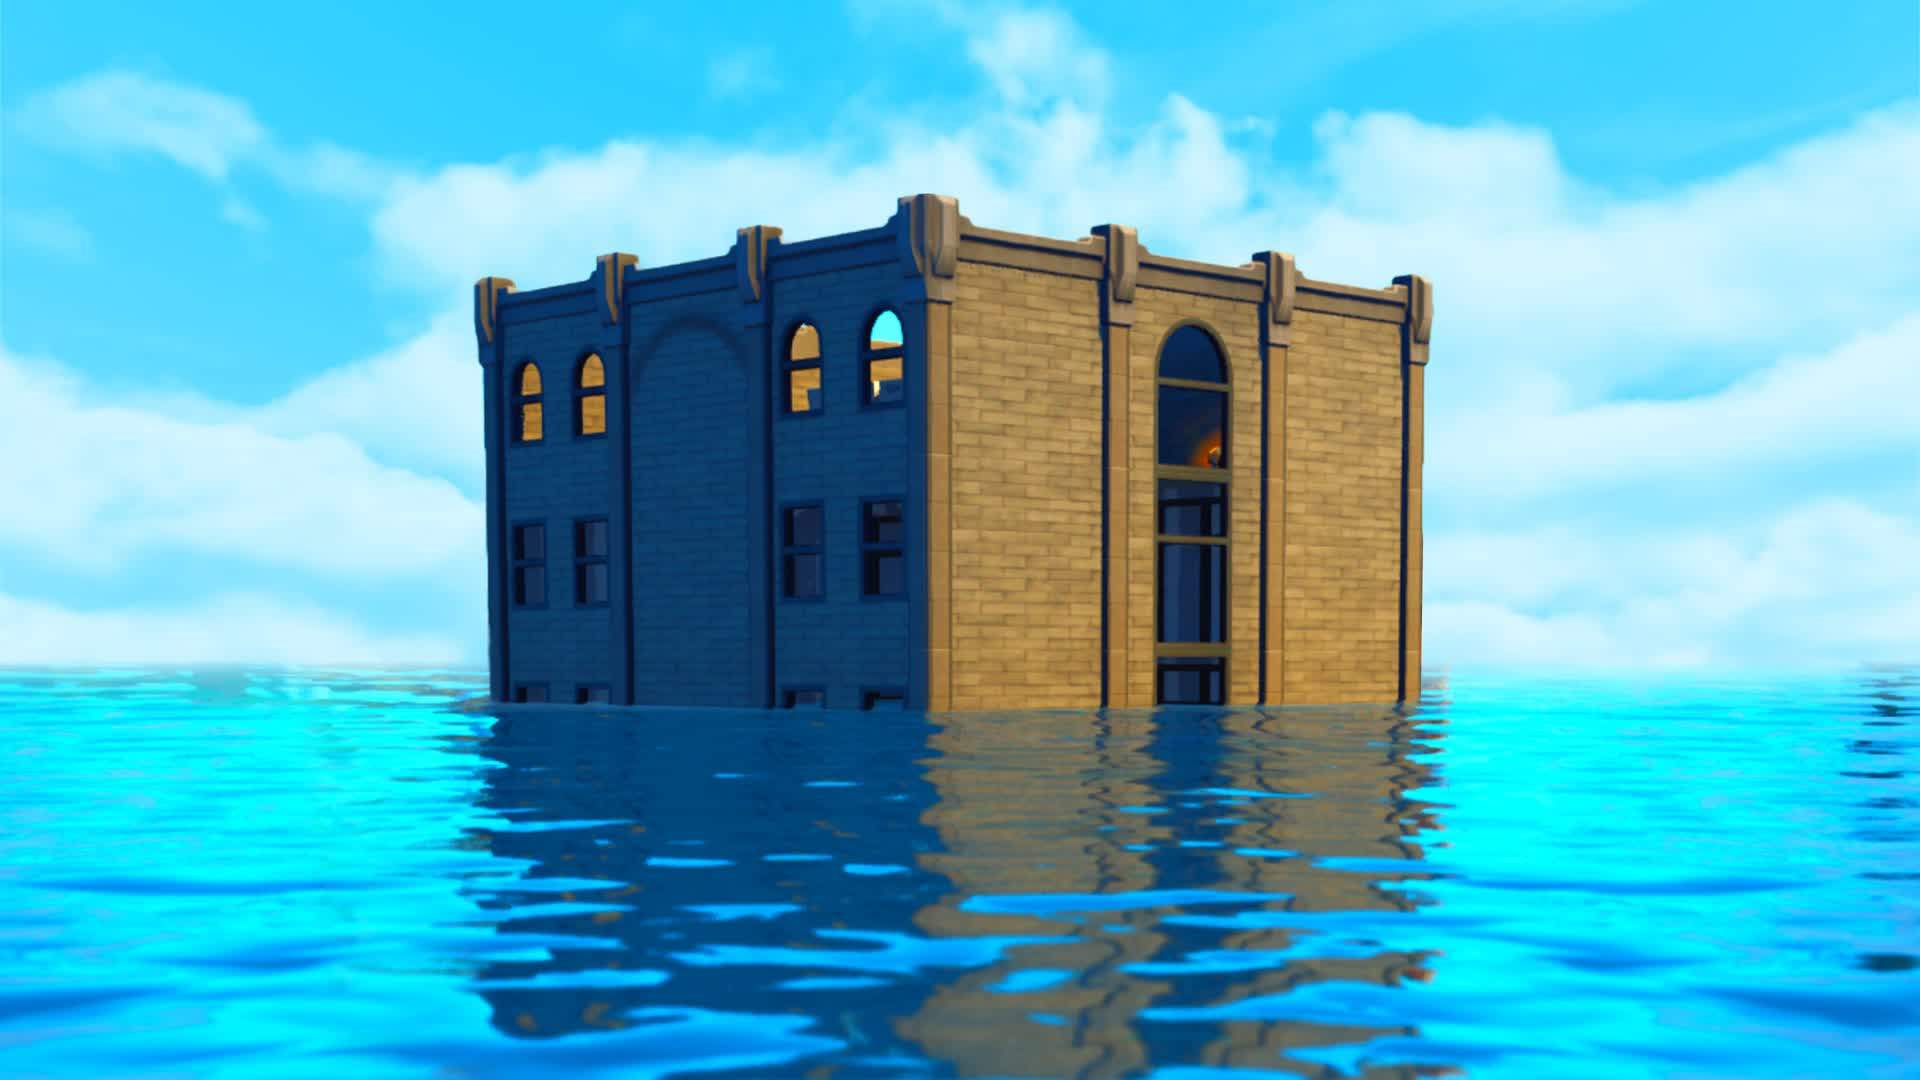 THE FLOOD: TILTED TOWERS